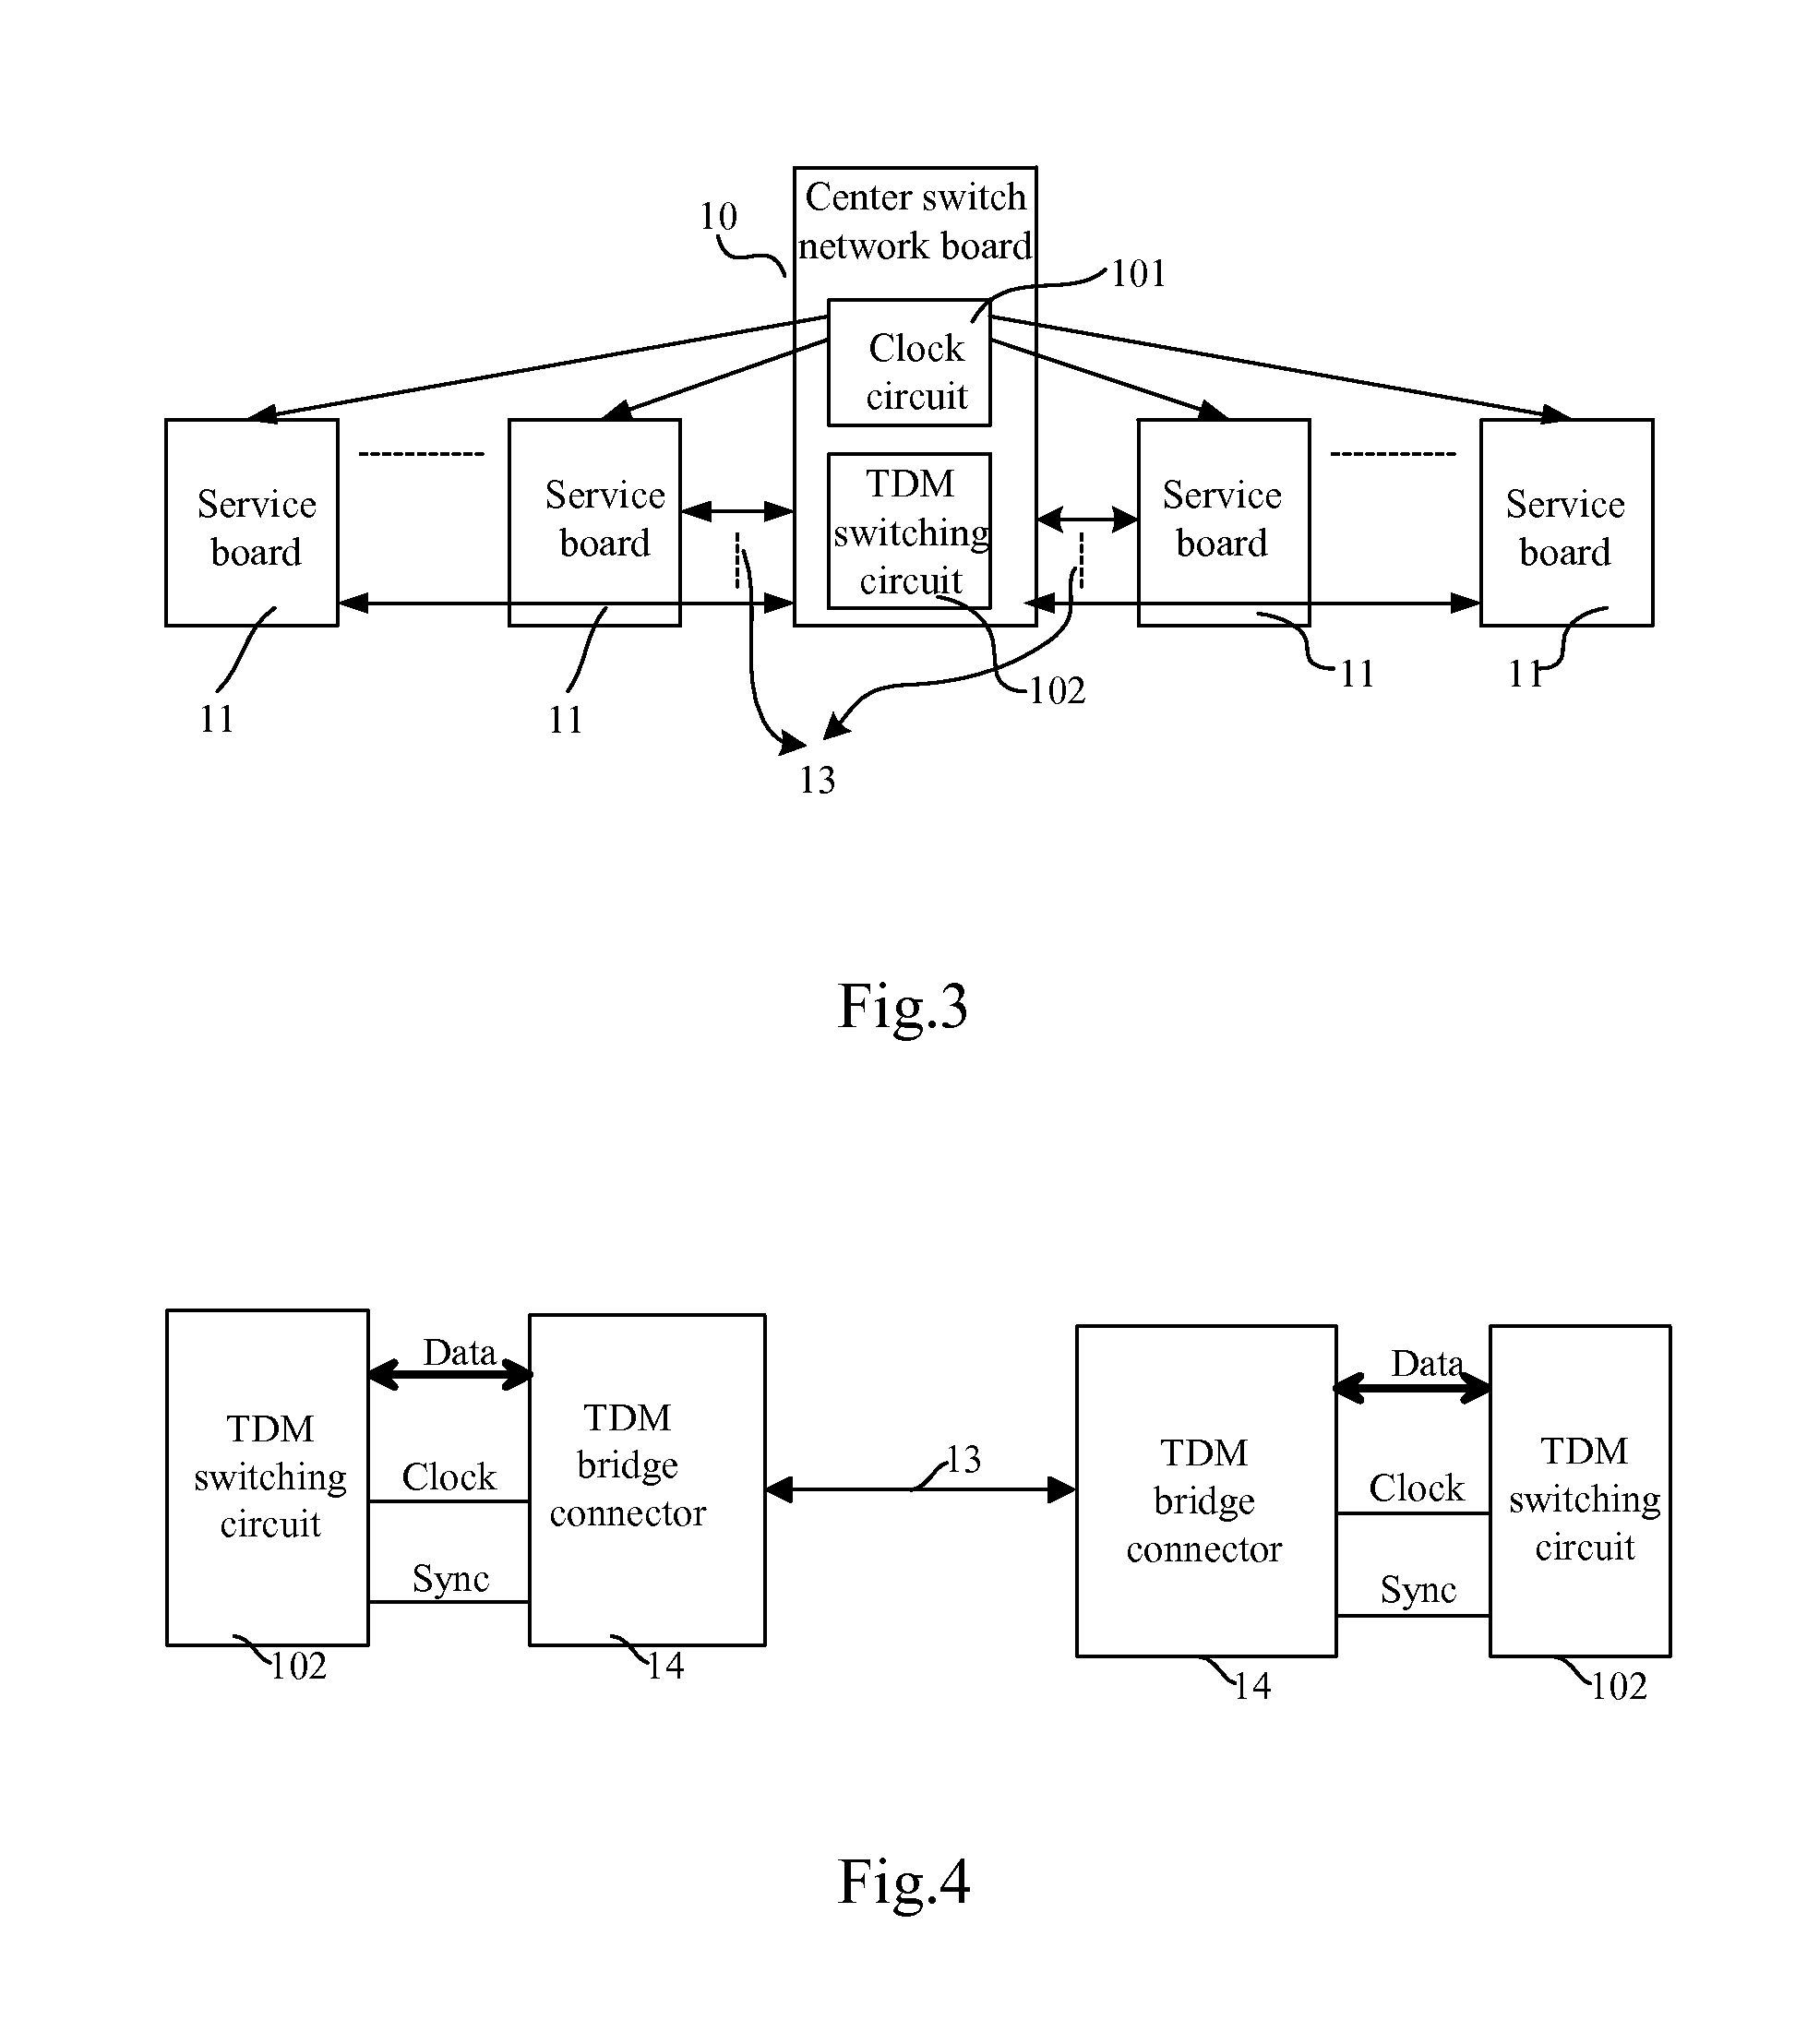 Method based on backboard transmitting time division multiplexing circuit data and a bridge connector